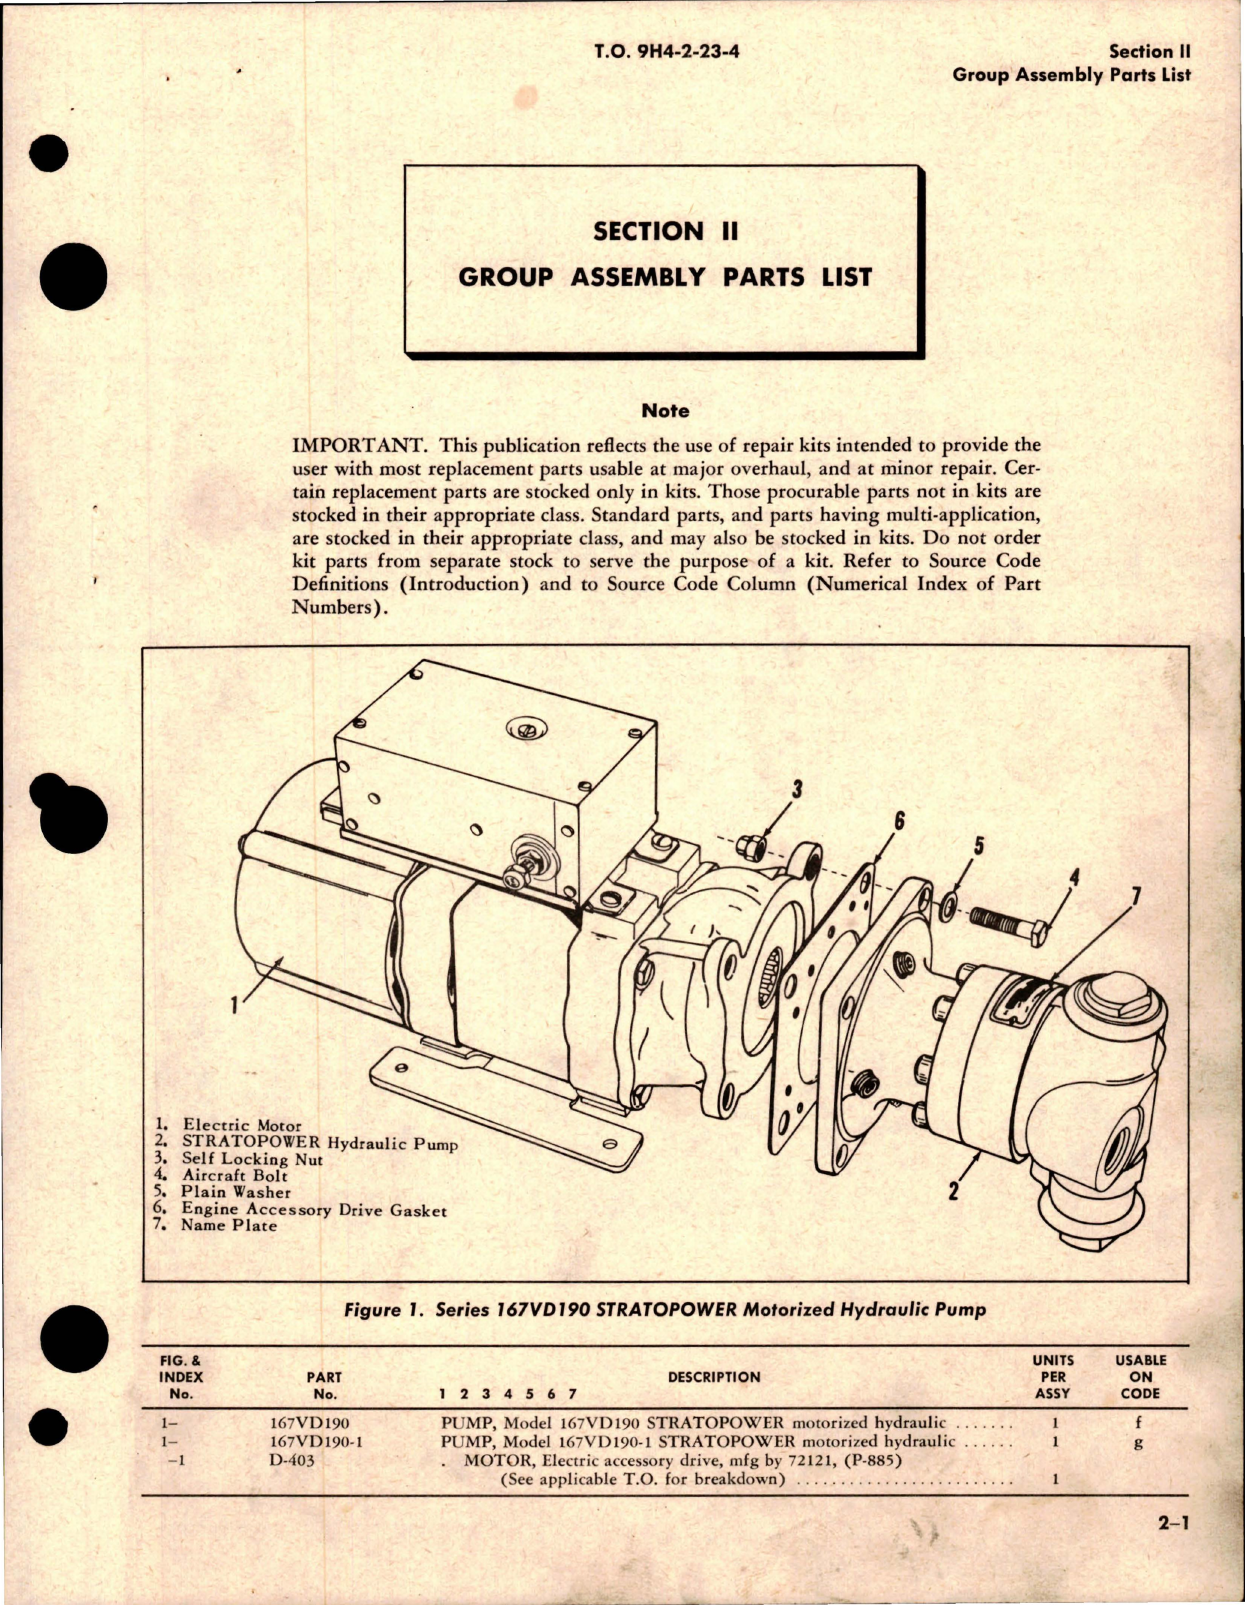 Sample page 5 from AirCorps Library document: Illustrated Parts Breakdown for Stratopower Hydraulic Pump w/Motorized 